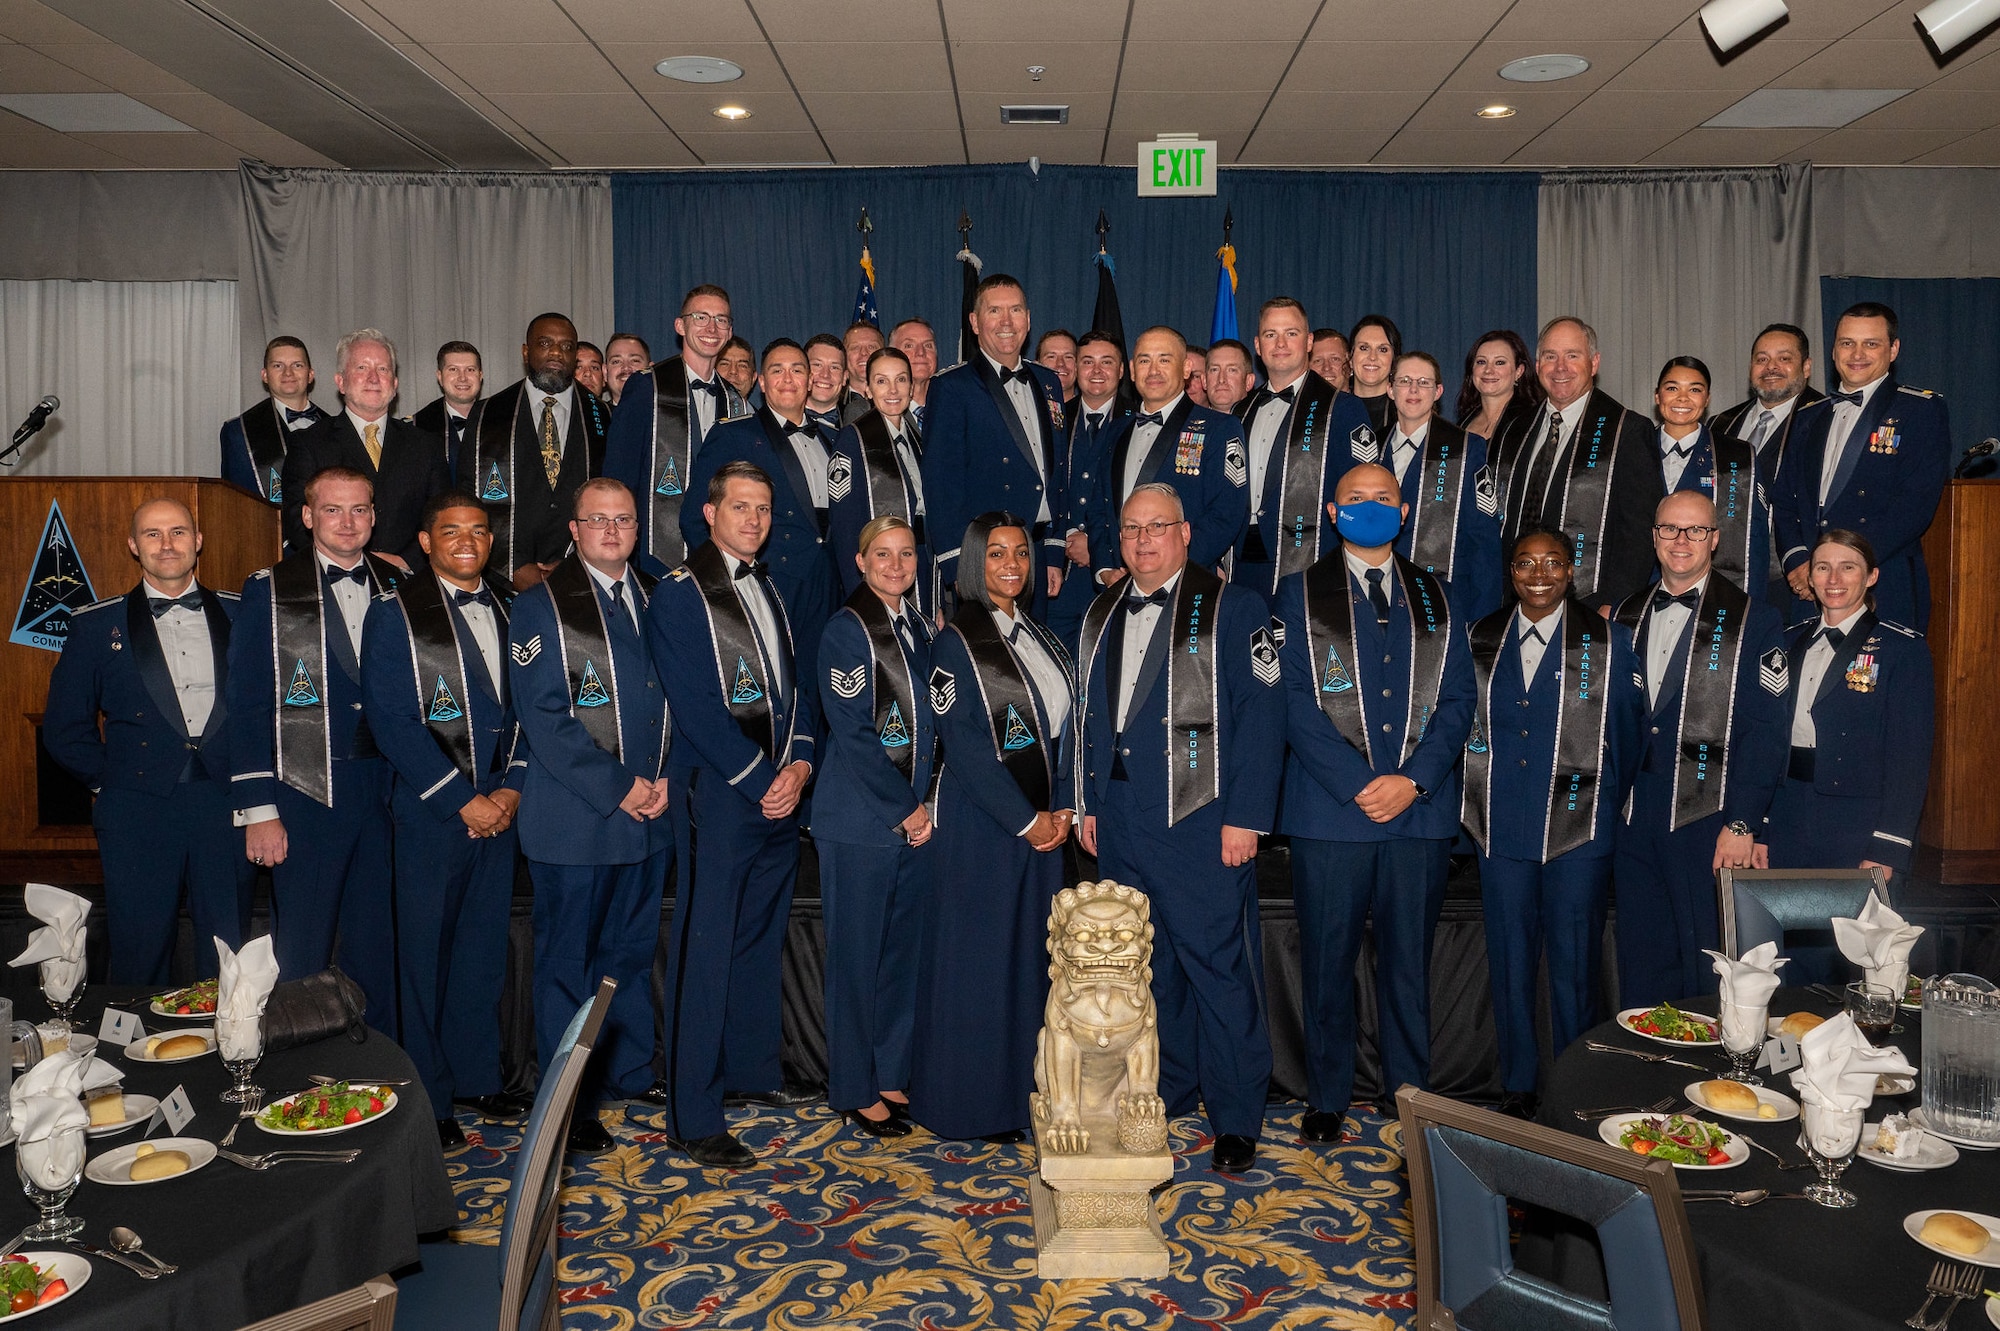 Members from Space Training and Readiness Command pose for a group photo during the field command's first-ever Annual Awards Banquet